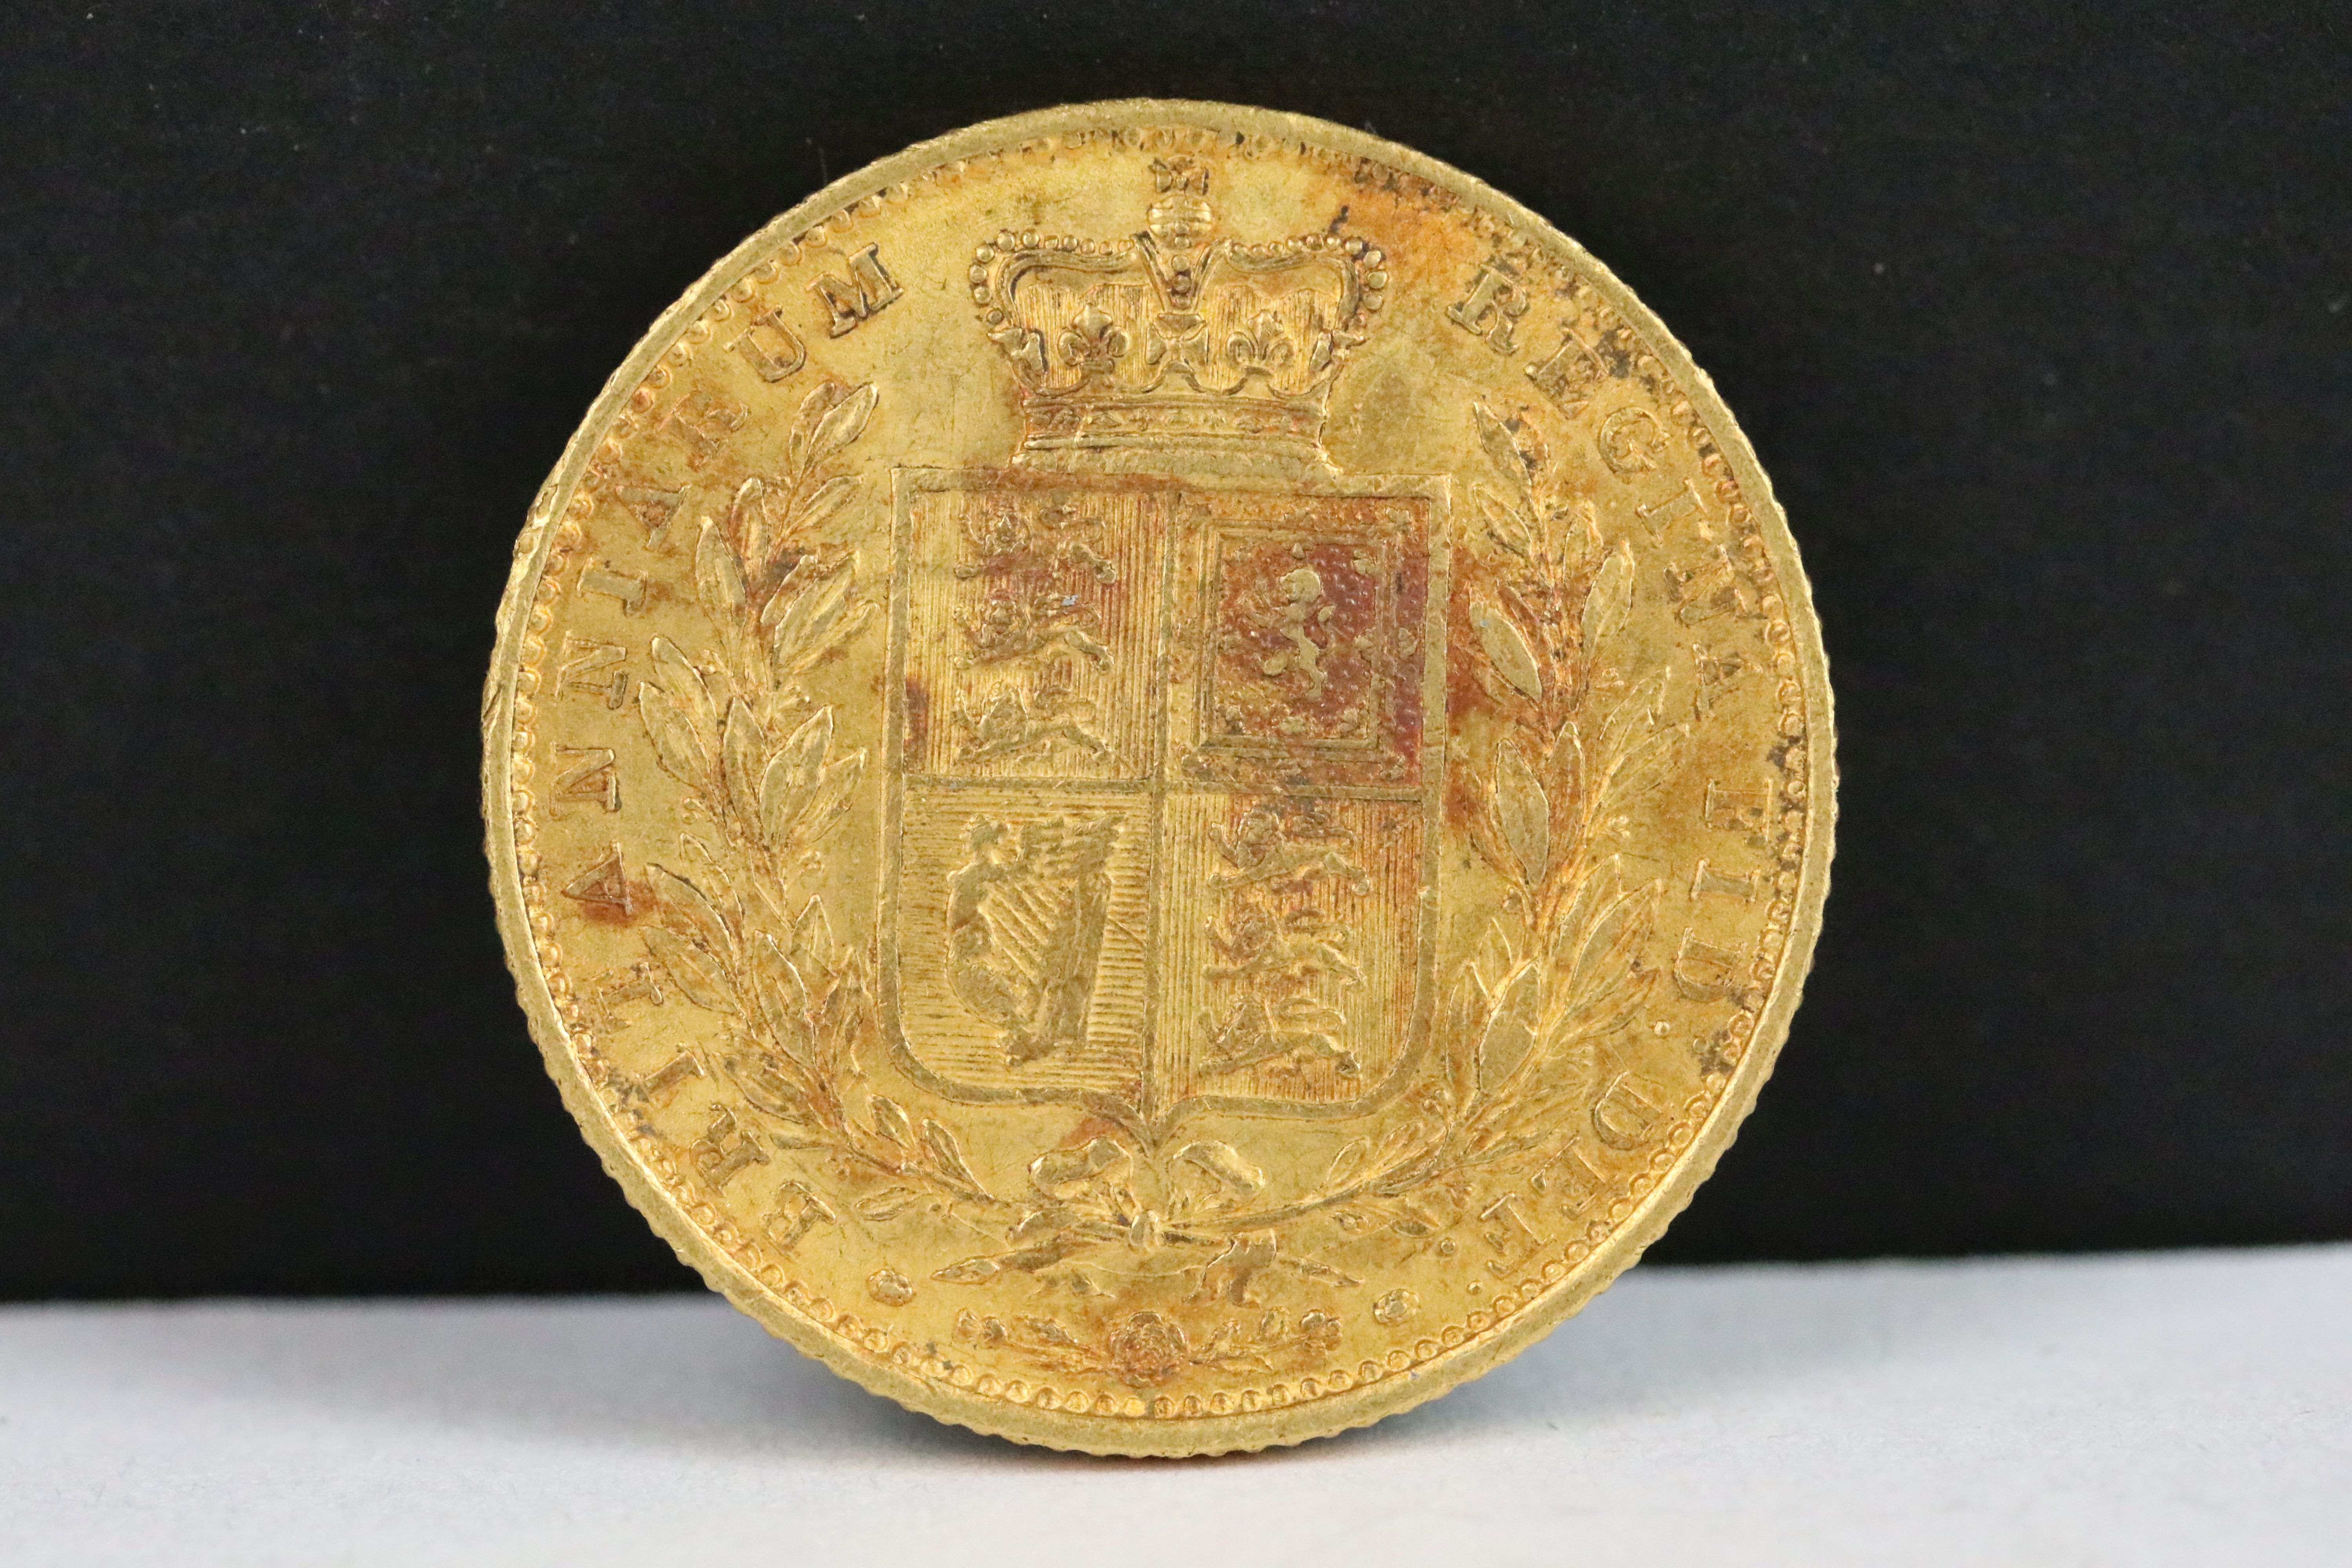 A British Queen Victoria 1850 gold full sovereign coin.